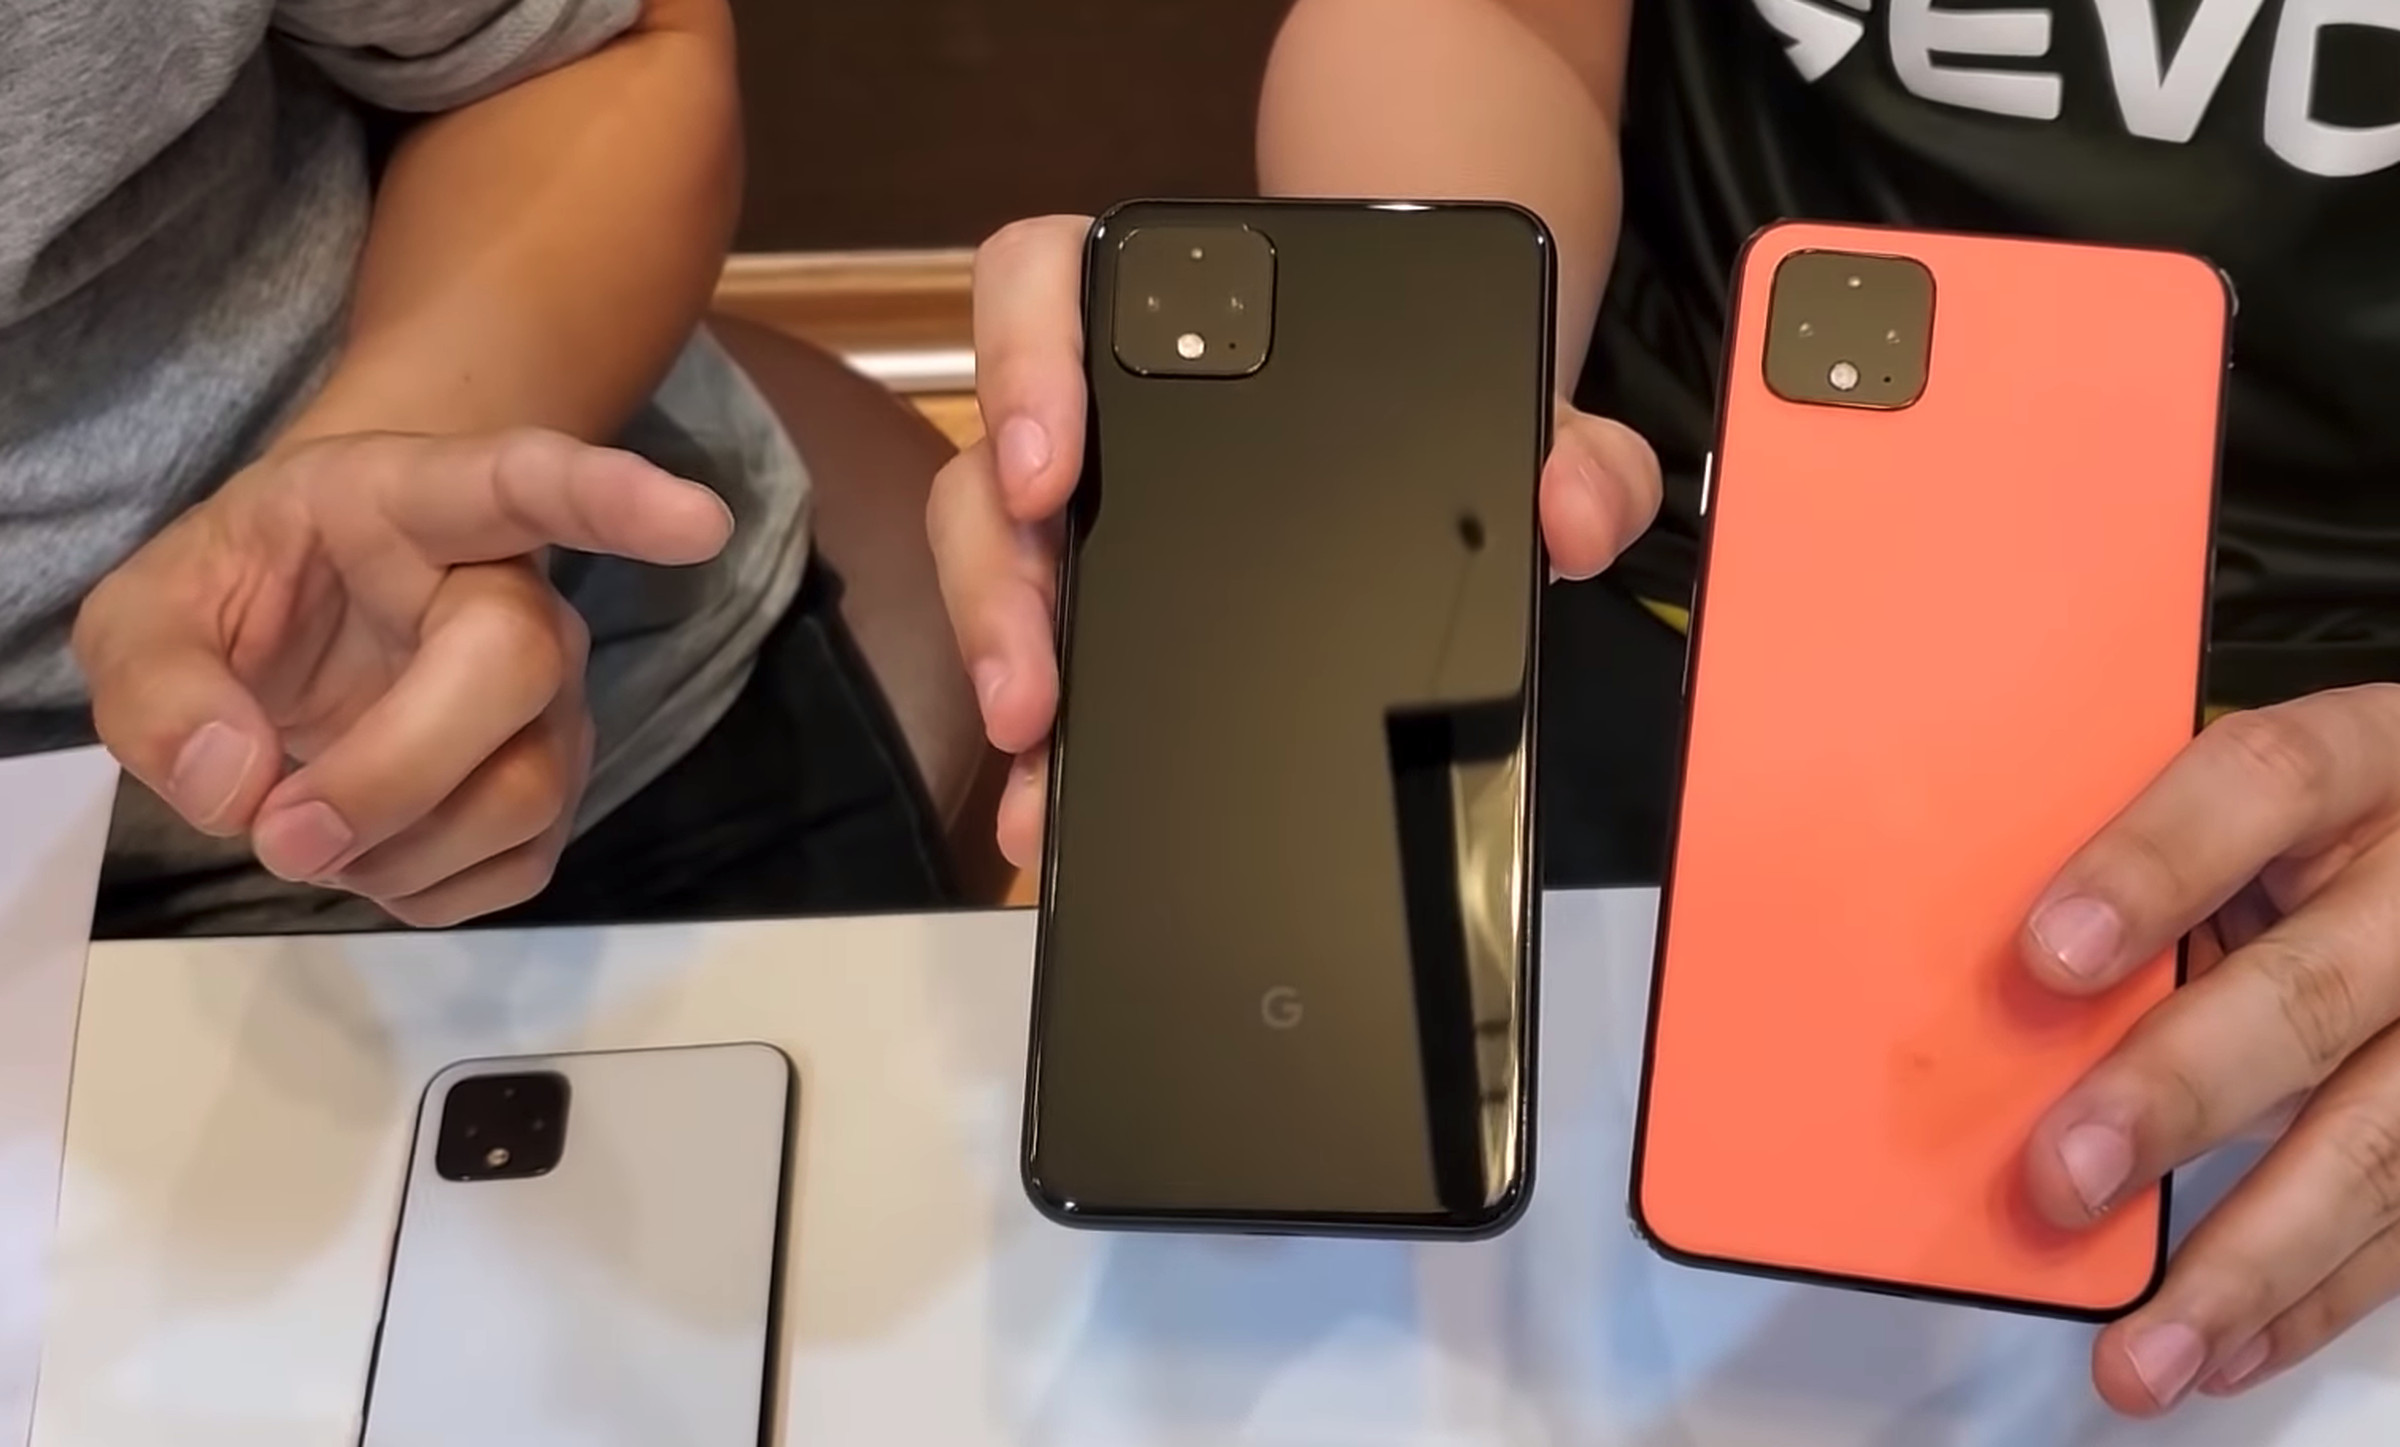 Each color has a black band around the device.